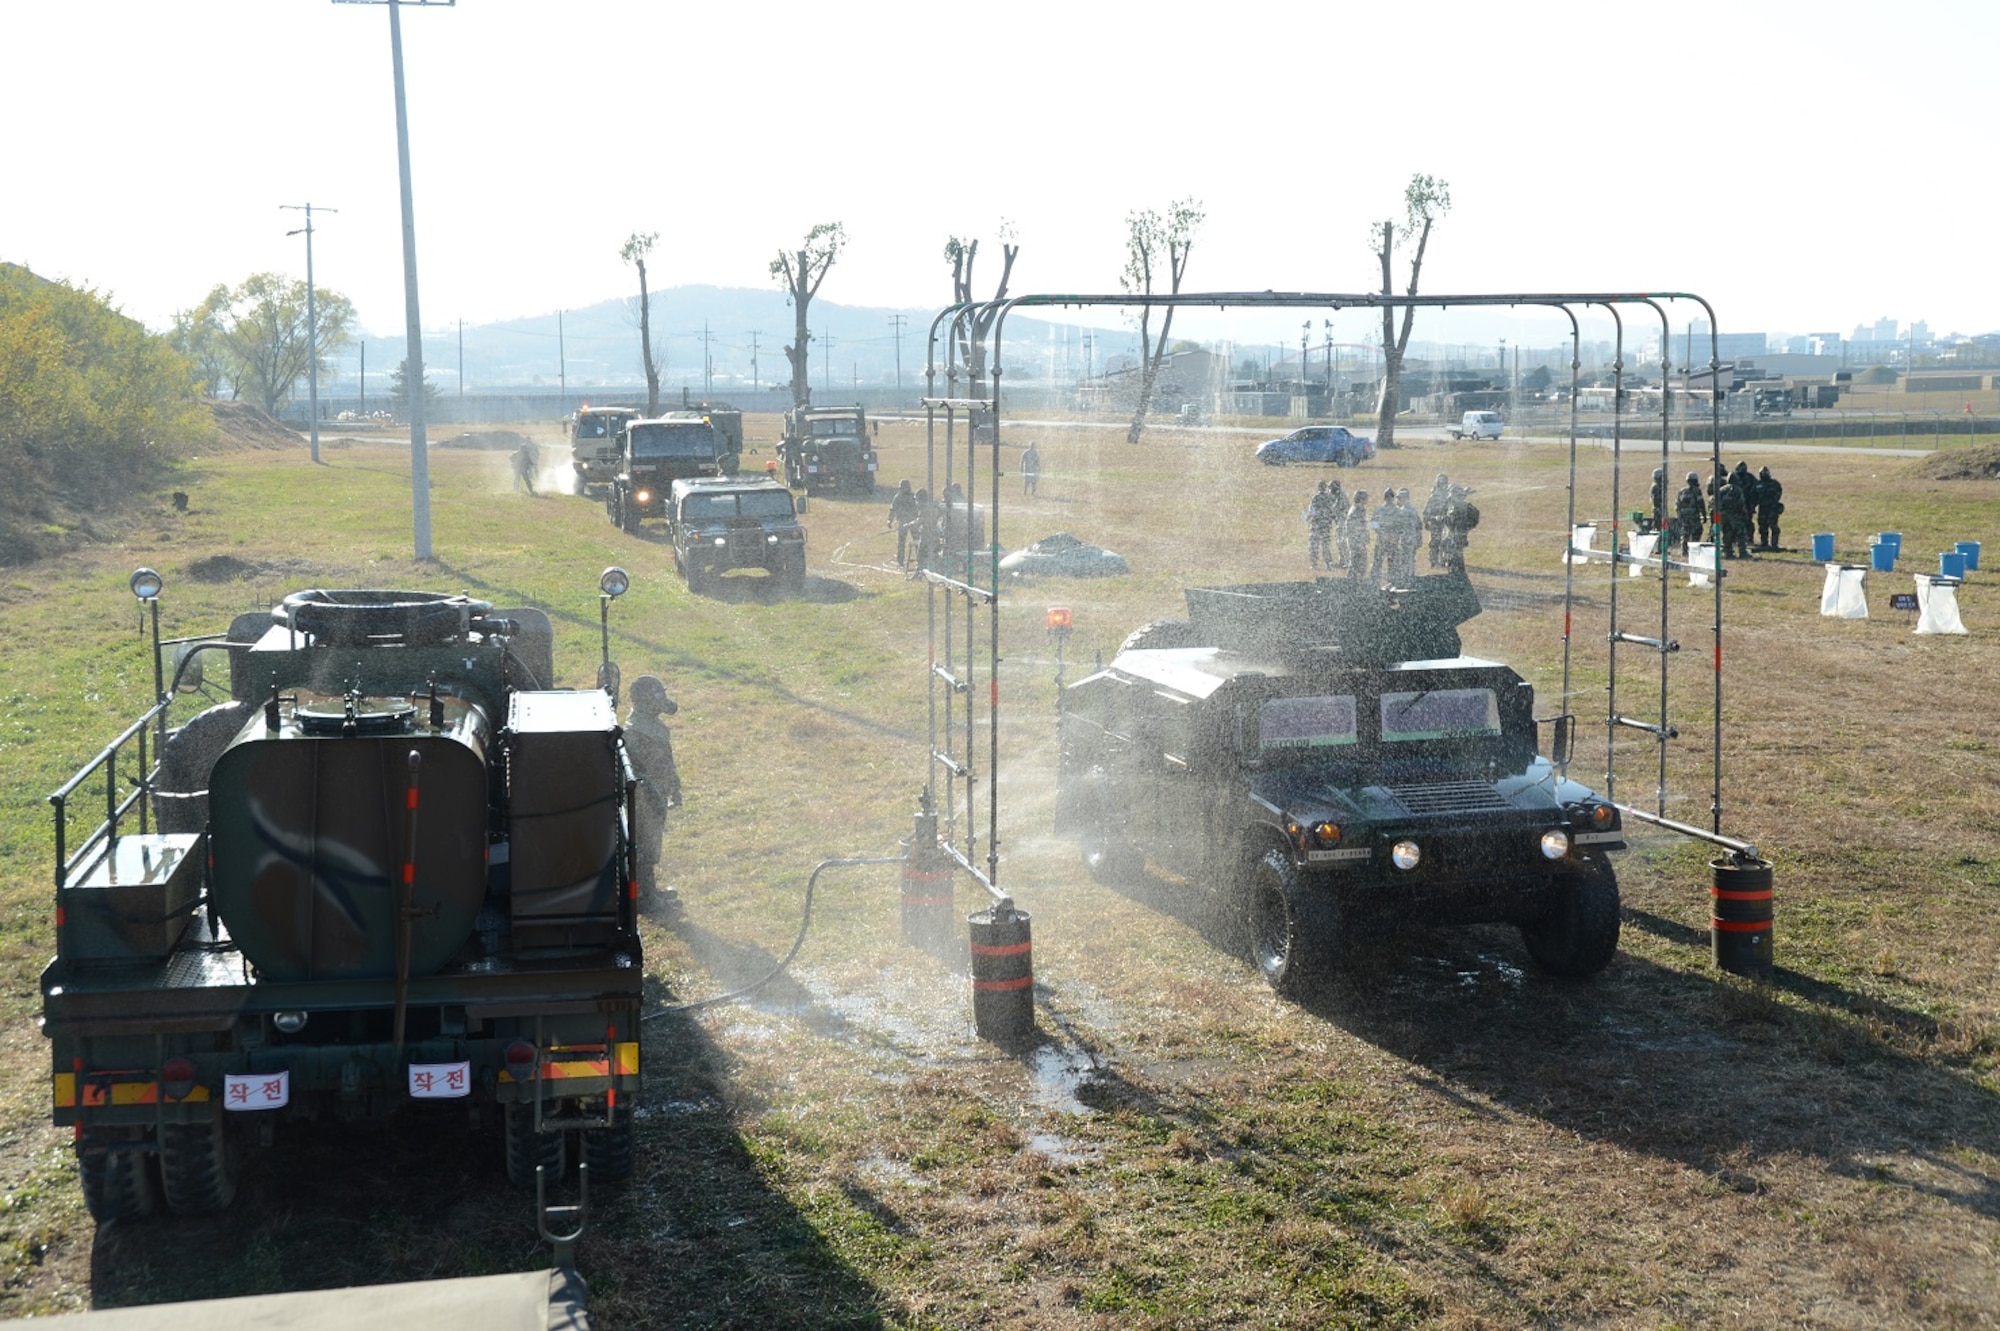 SUWON AB – ROKAF 10th Fighter Wing chemical specialists practice decontaminating the vehicles of Company F, 6th Battalion 52nd Air Defense Artillery Regiment, during a base defense exercise here, Nov. 12. (U.S. Army Photo by Sgt. Song, Sung Geun, Civil Affairs, 6-52 ADA)